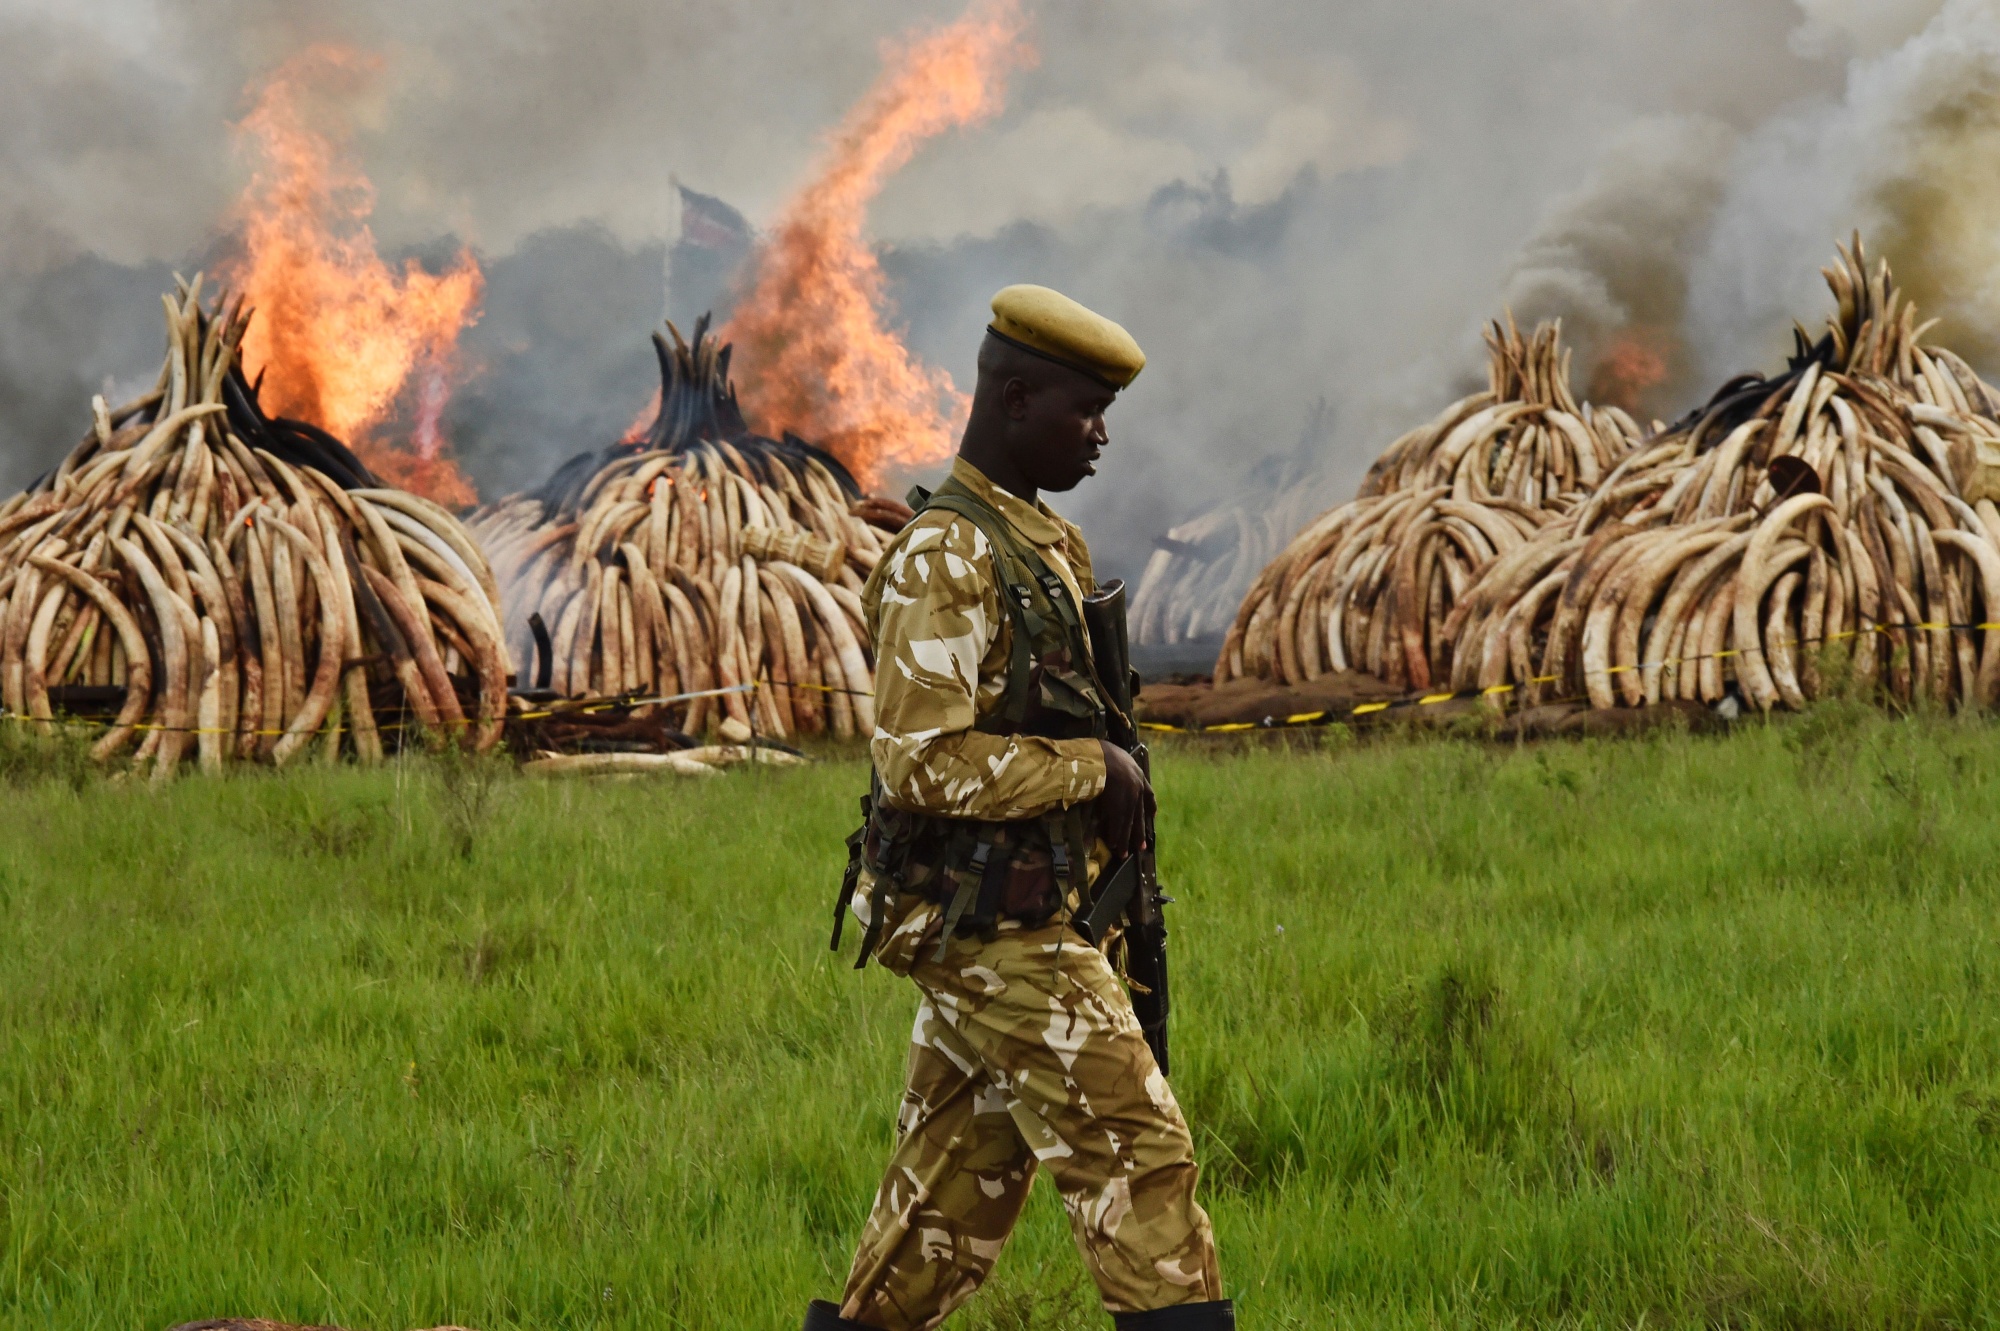 As countries like Kenya and Tanzania stepped up anti-poaching patrols&nbsp;and smuggling enforcement, criminal syndicates shifted their activity to other regions, such as central and southern Africa.